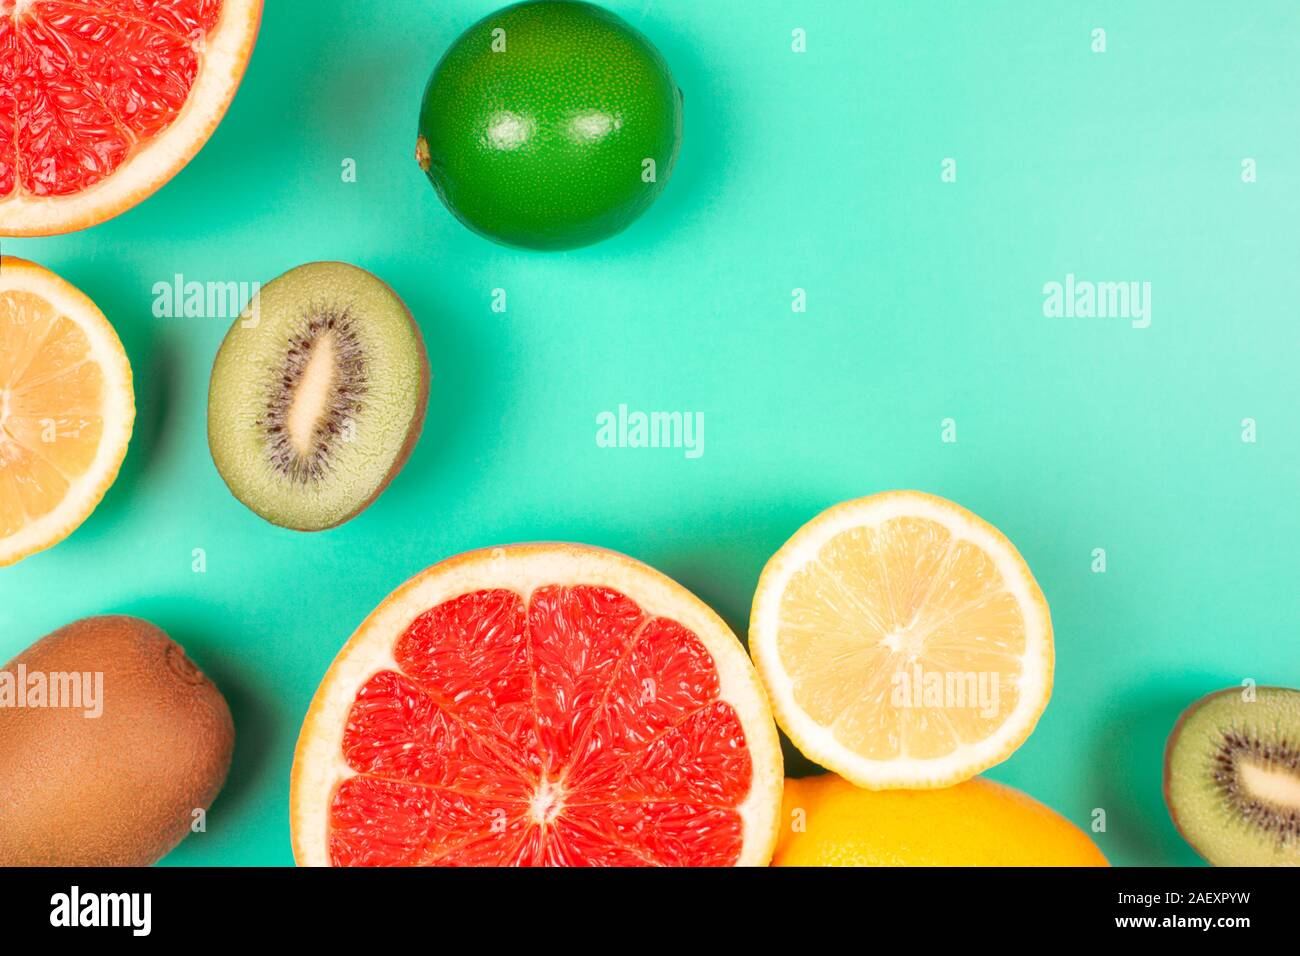 Fruits on trendy green background. Flat lay style. Stock Photo